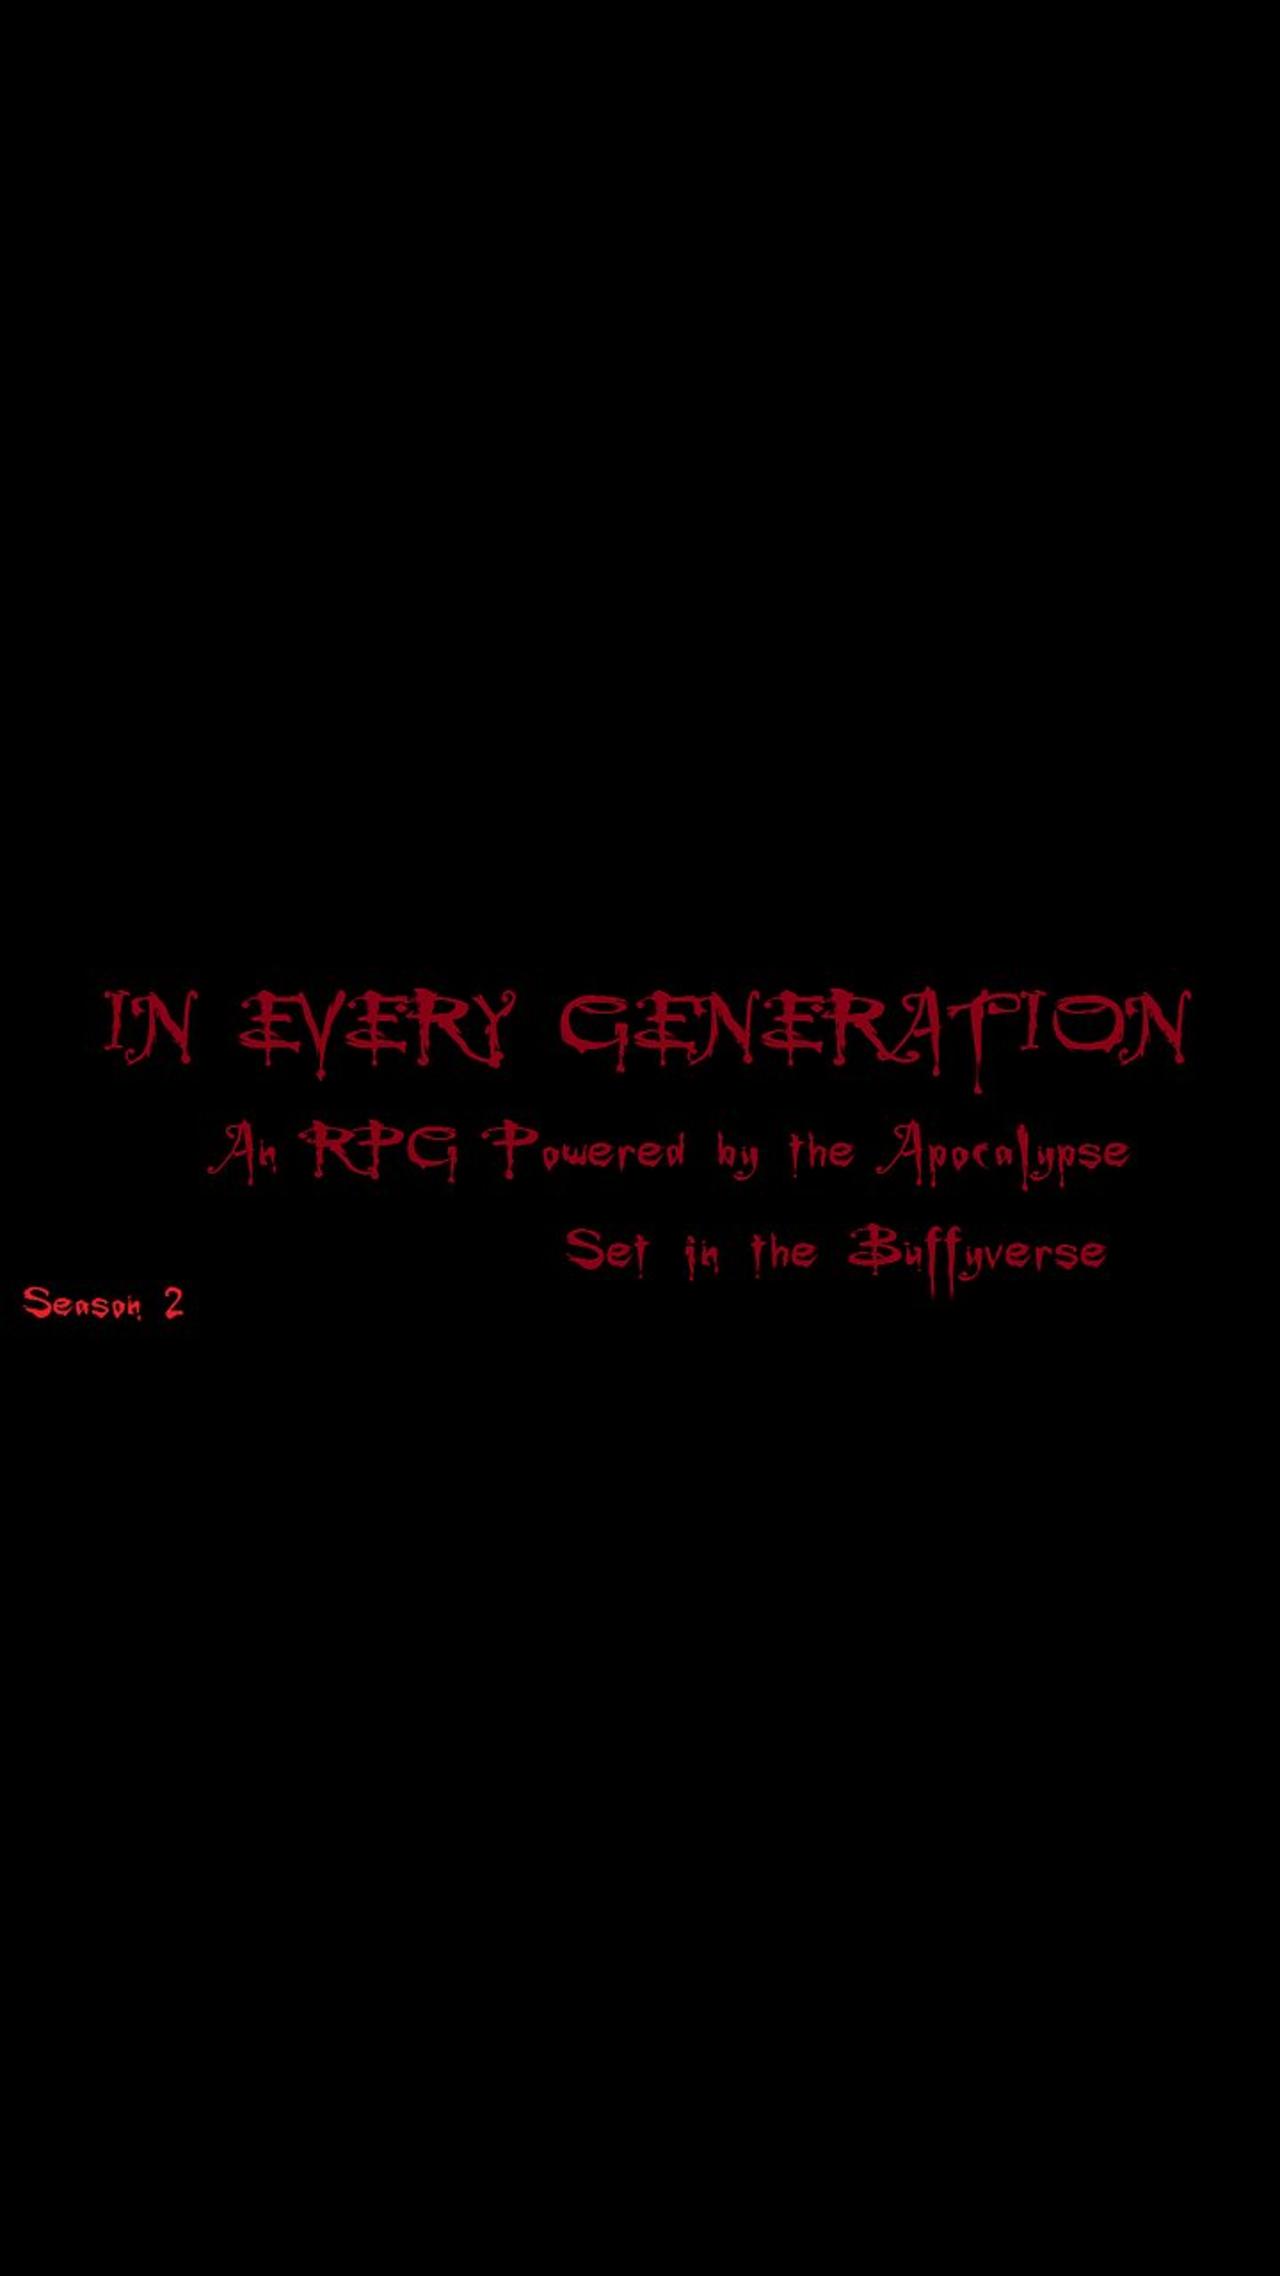 In Every Generation - Powered by the Apocalypse set in the Buffyverse [s02e04 - "At What Cost?"]